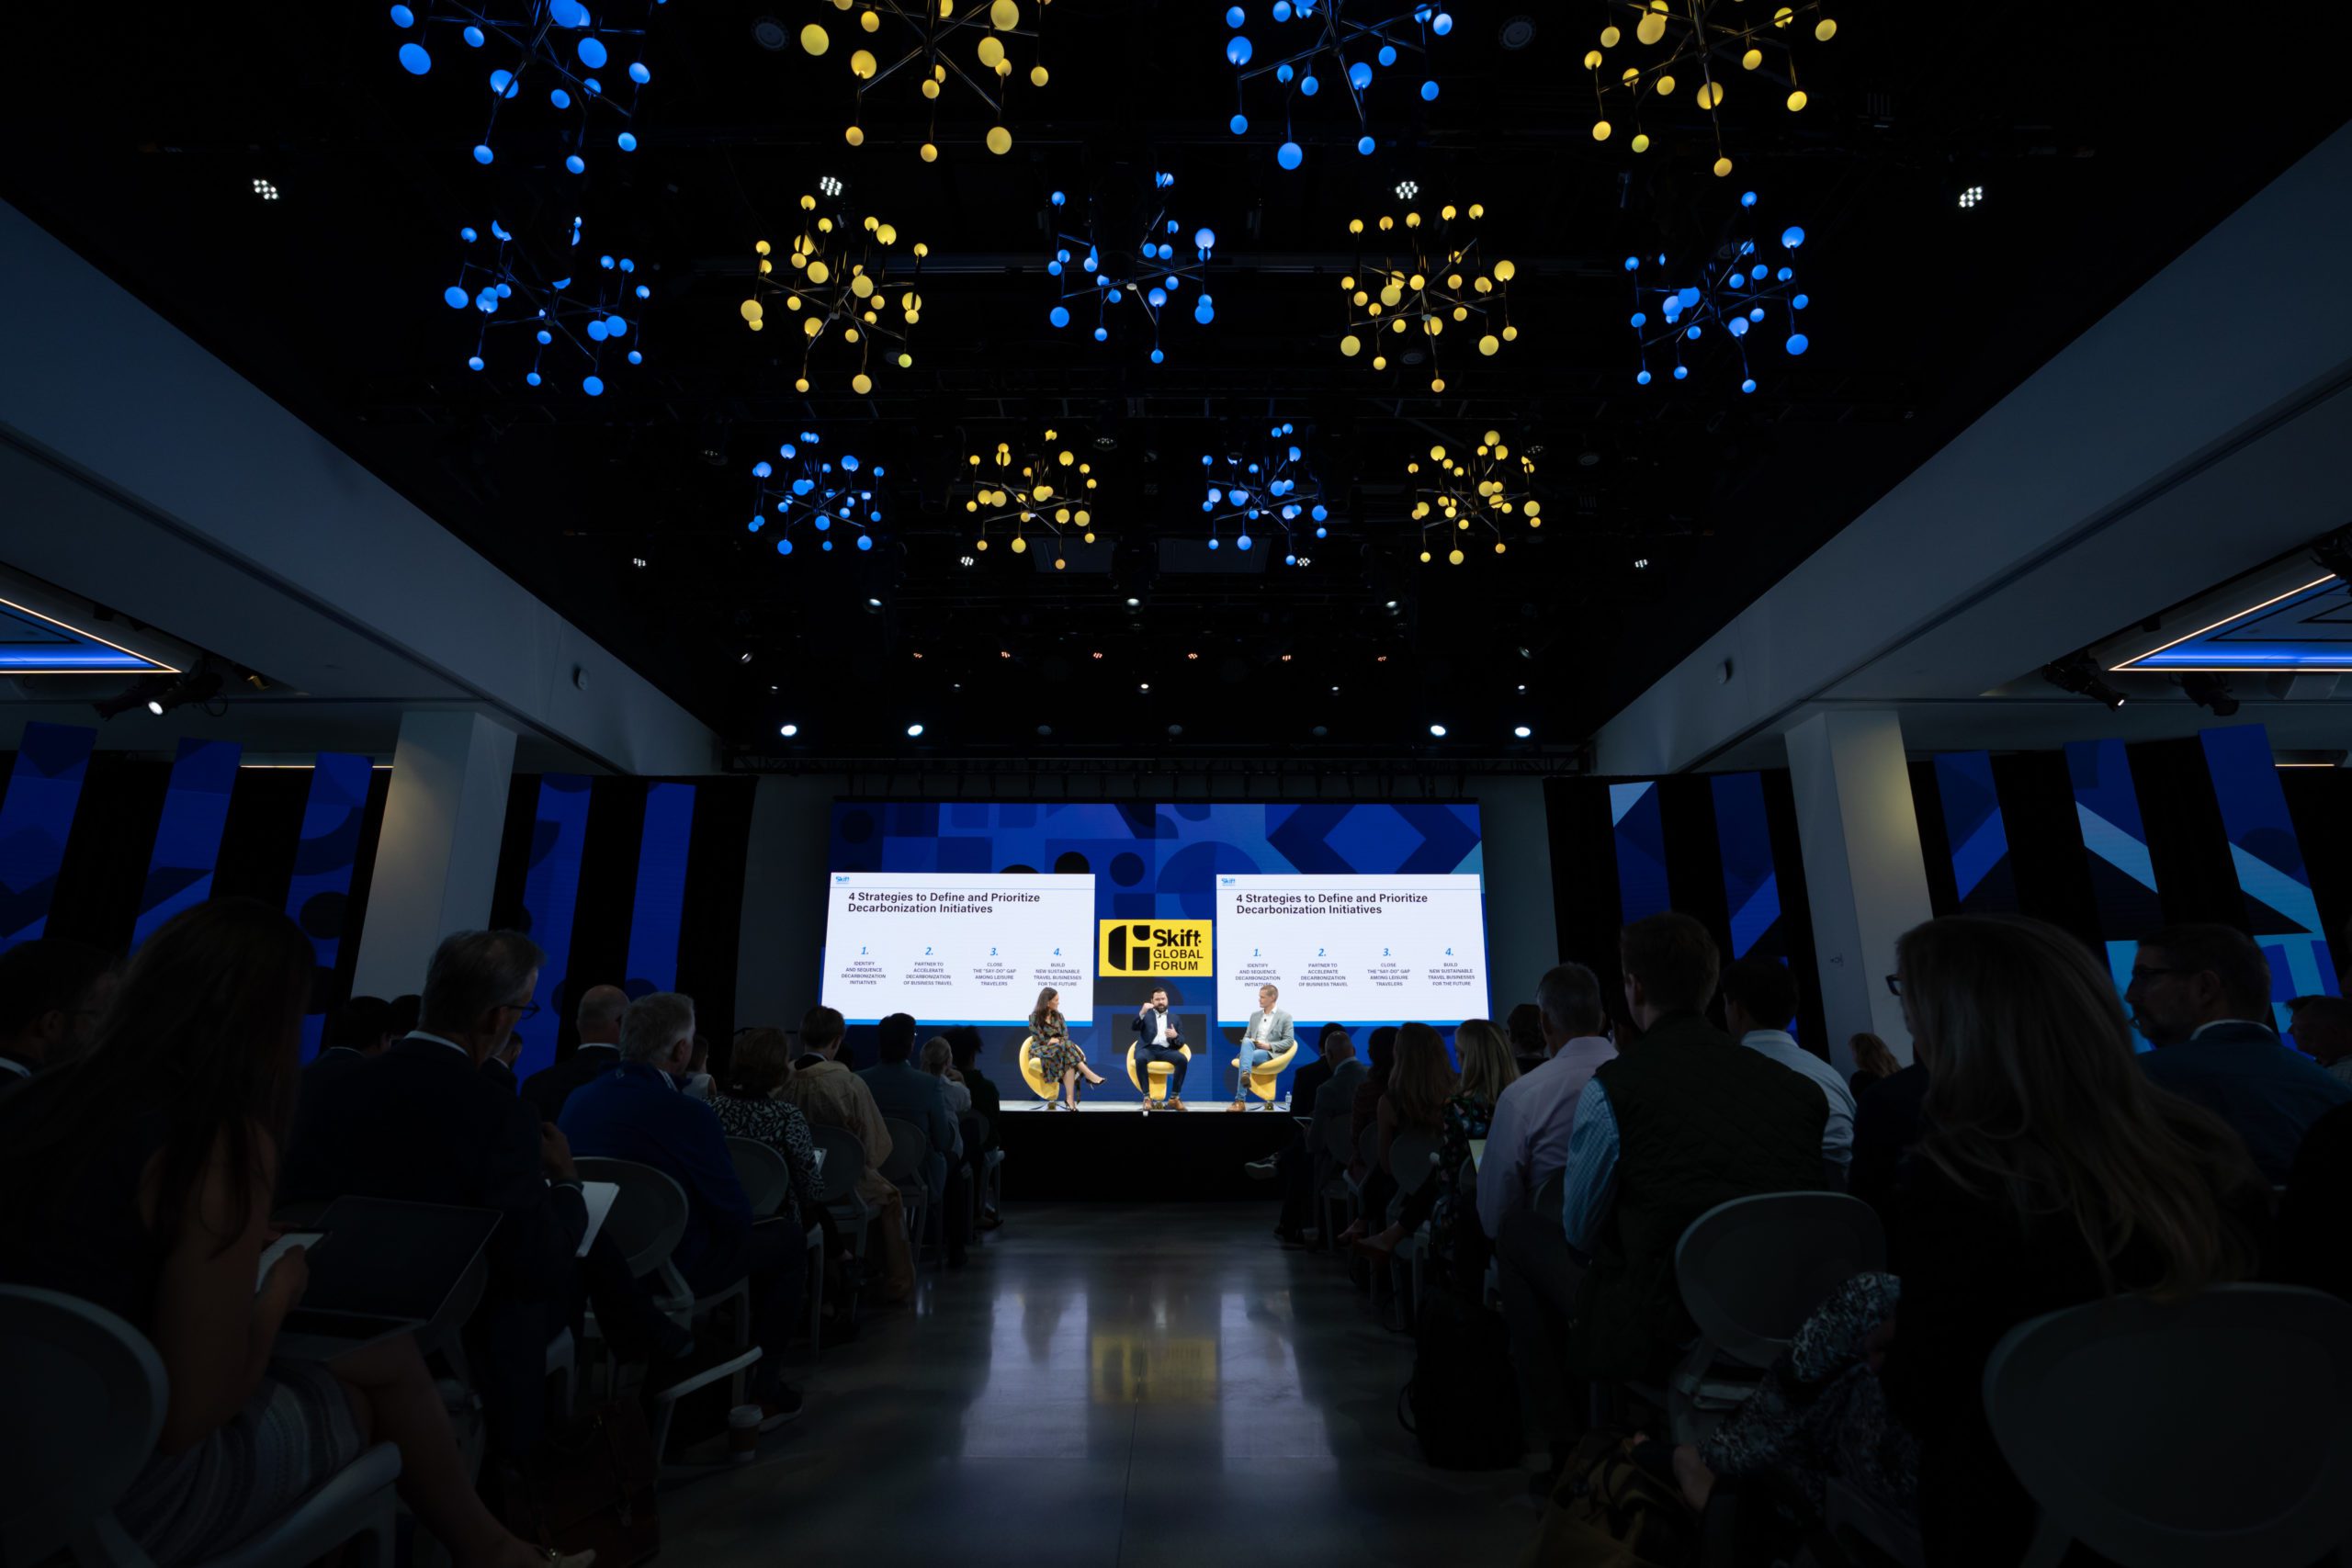 The stage of Skift Global Forum 2022 hosted in The Glasshouse in New York City venue. The image shows 3 speakers on stage in front of a large audience.